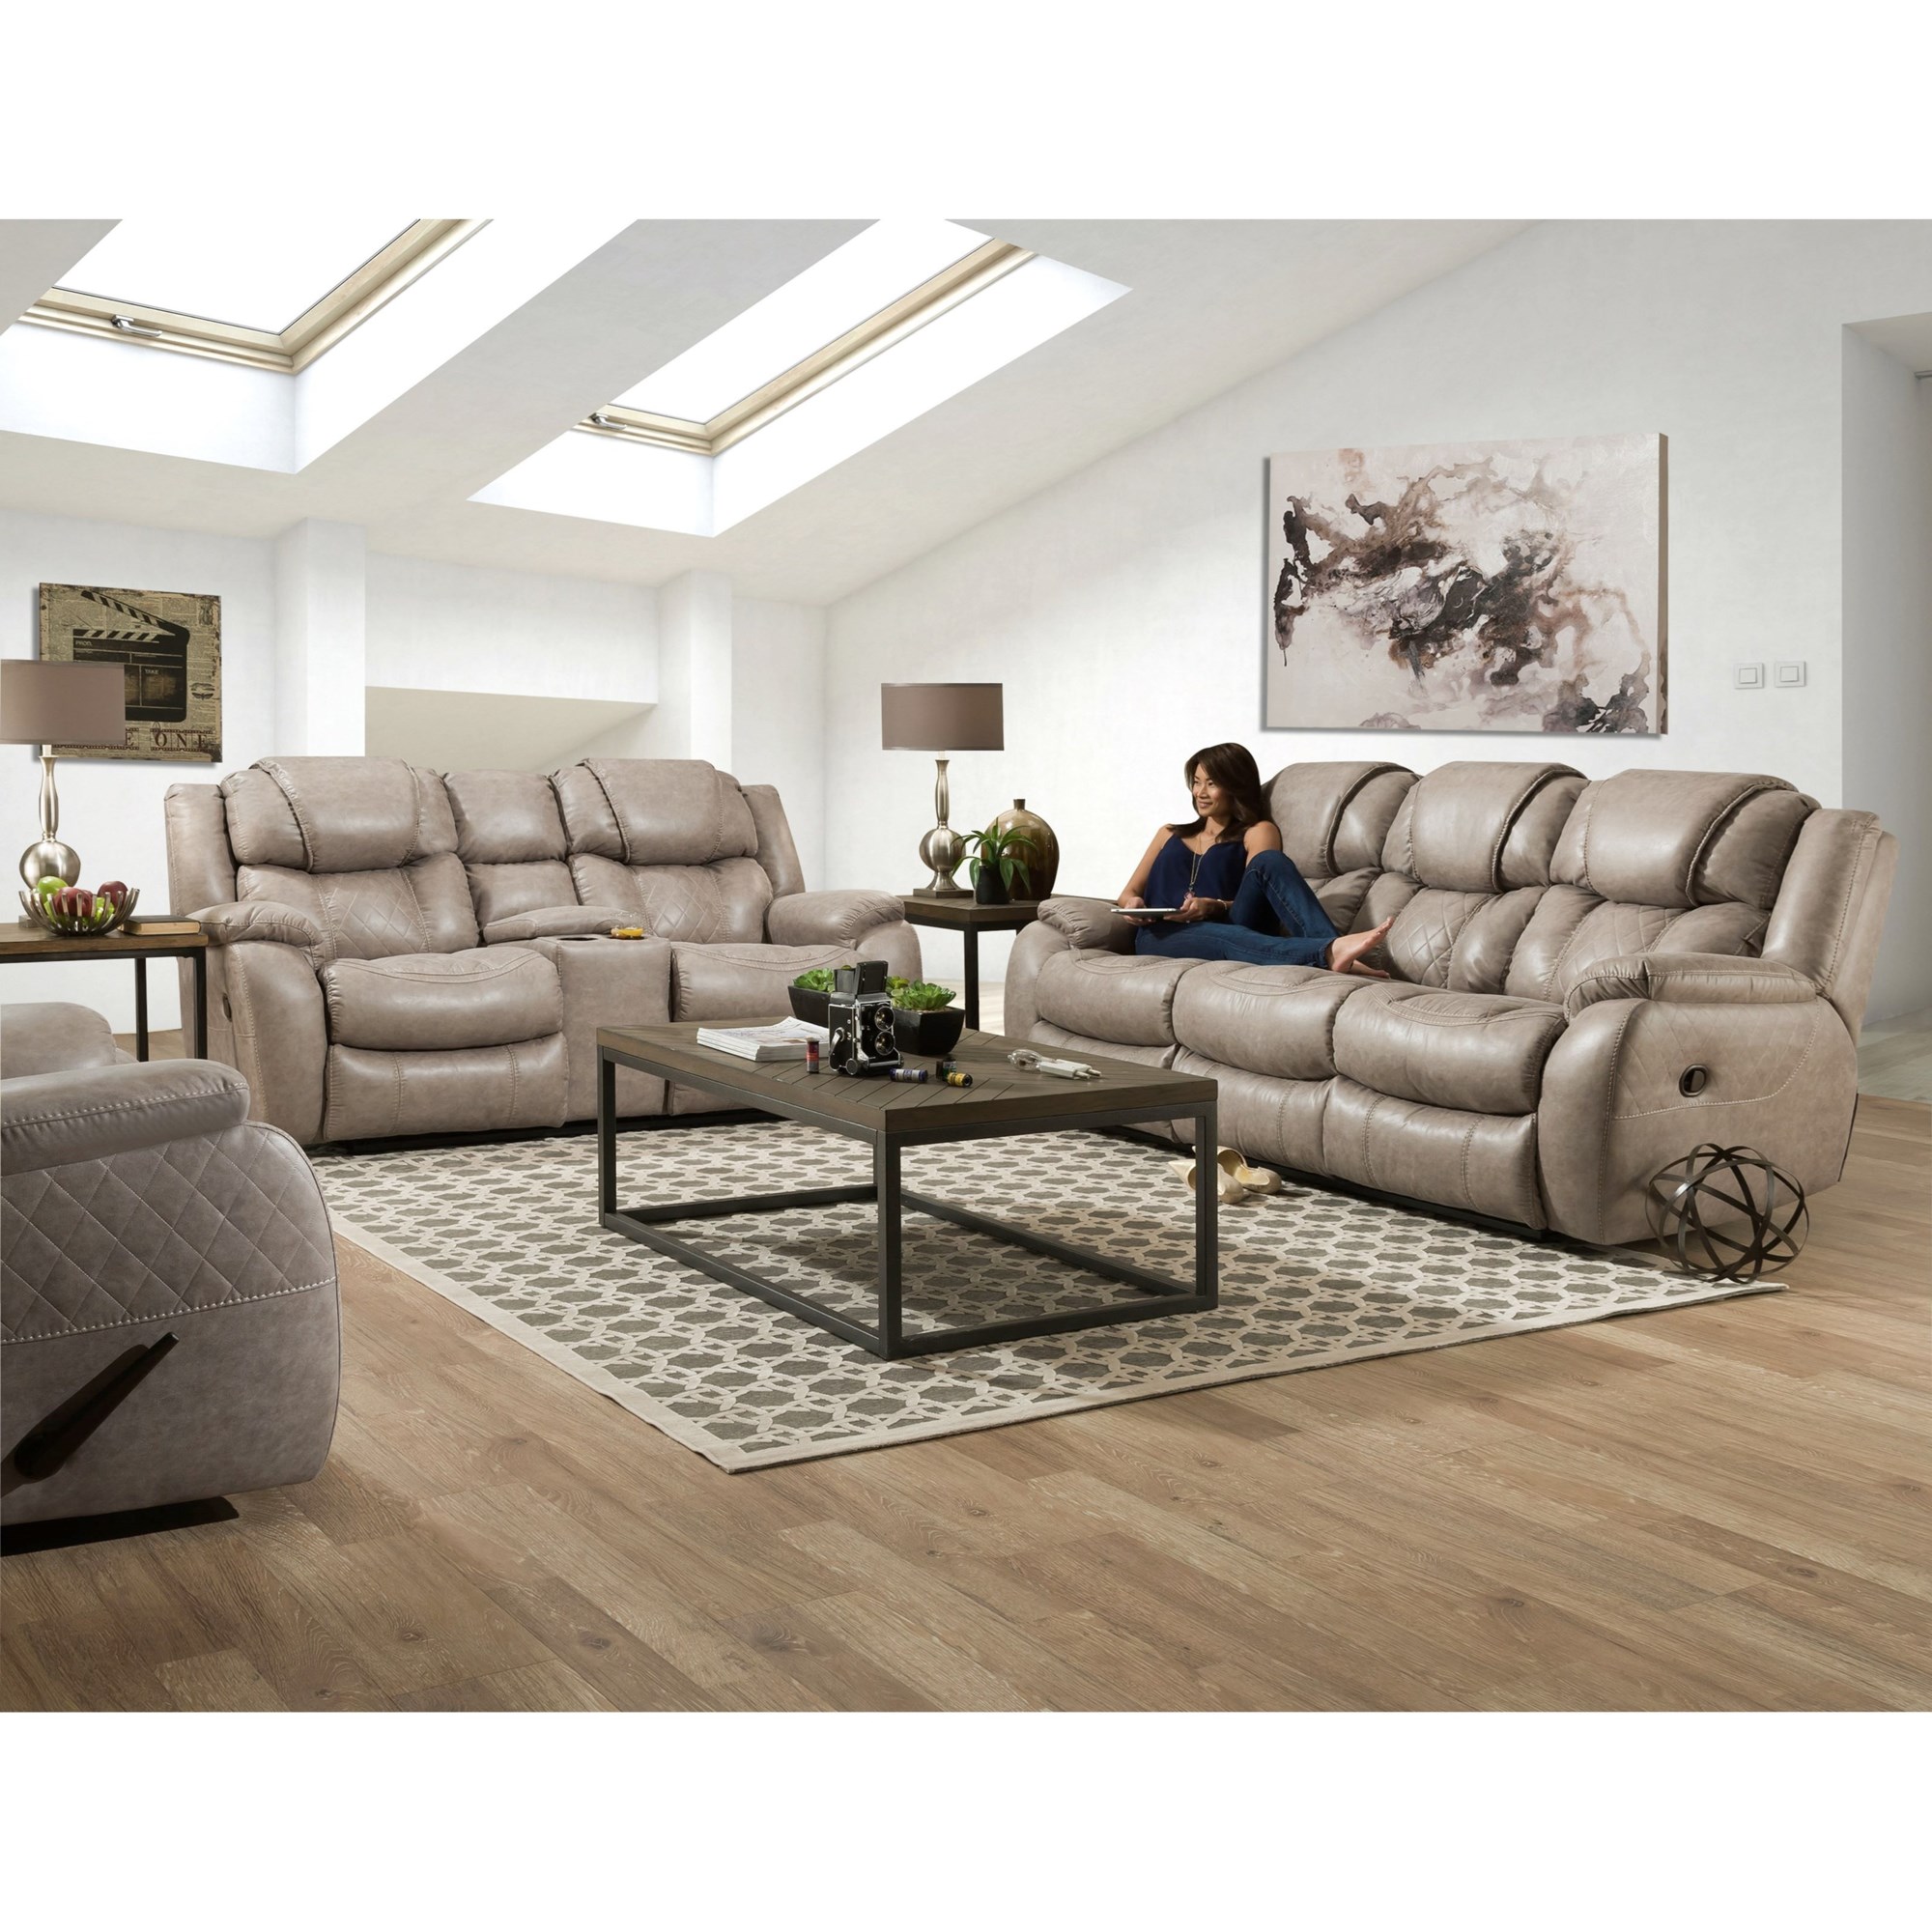 Homestretch Marlin Dc288 Casual Style Double Reclining Sofa Standard Furniture Reclining Sofa